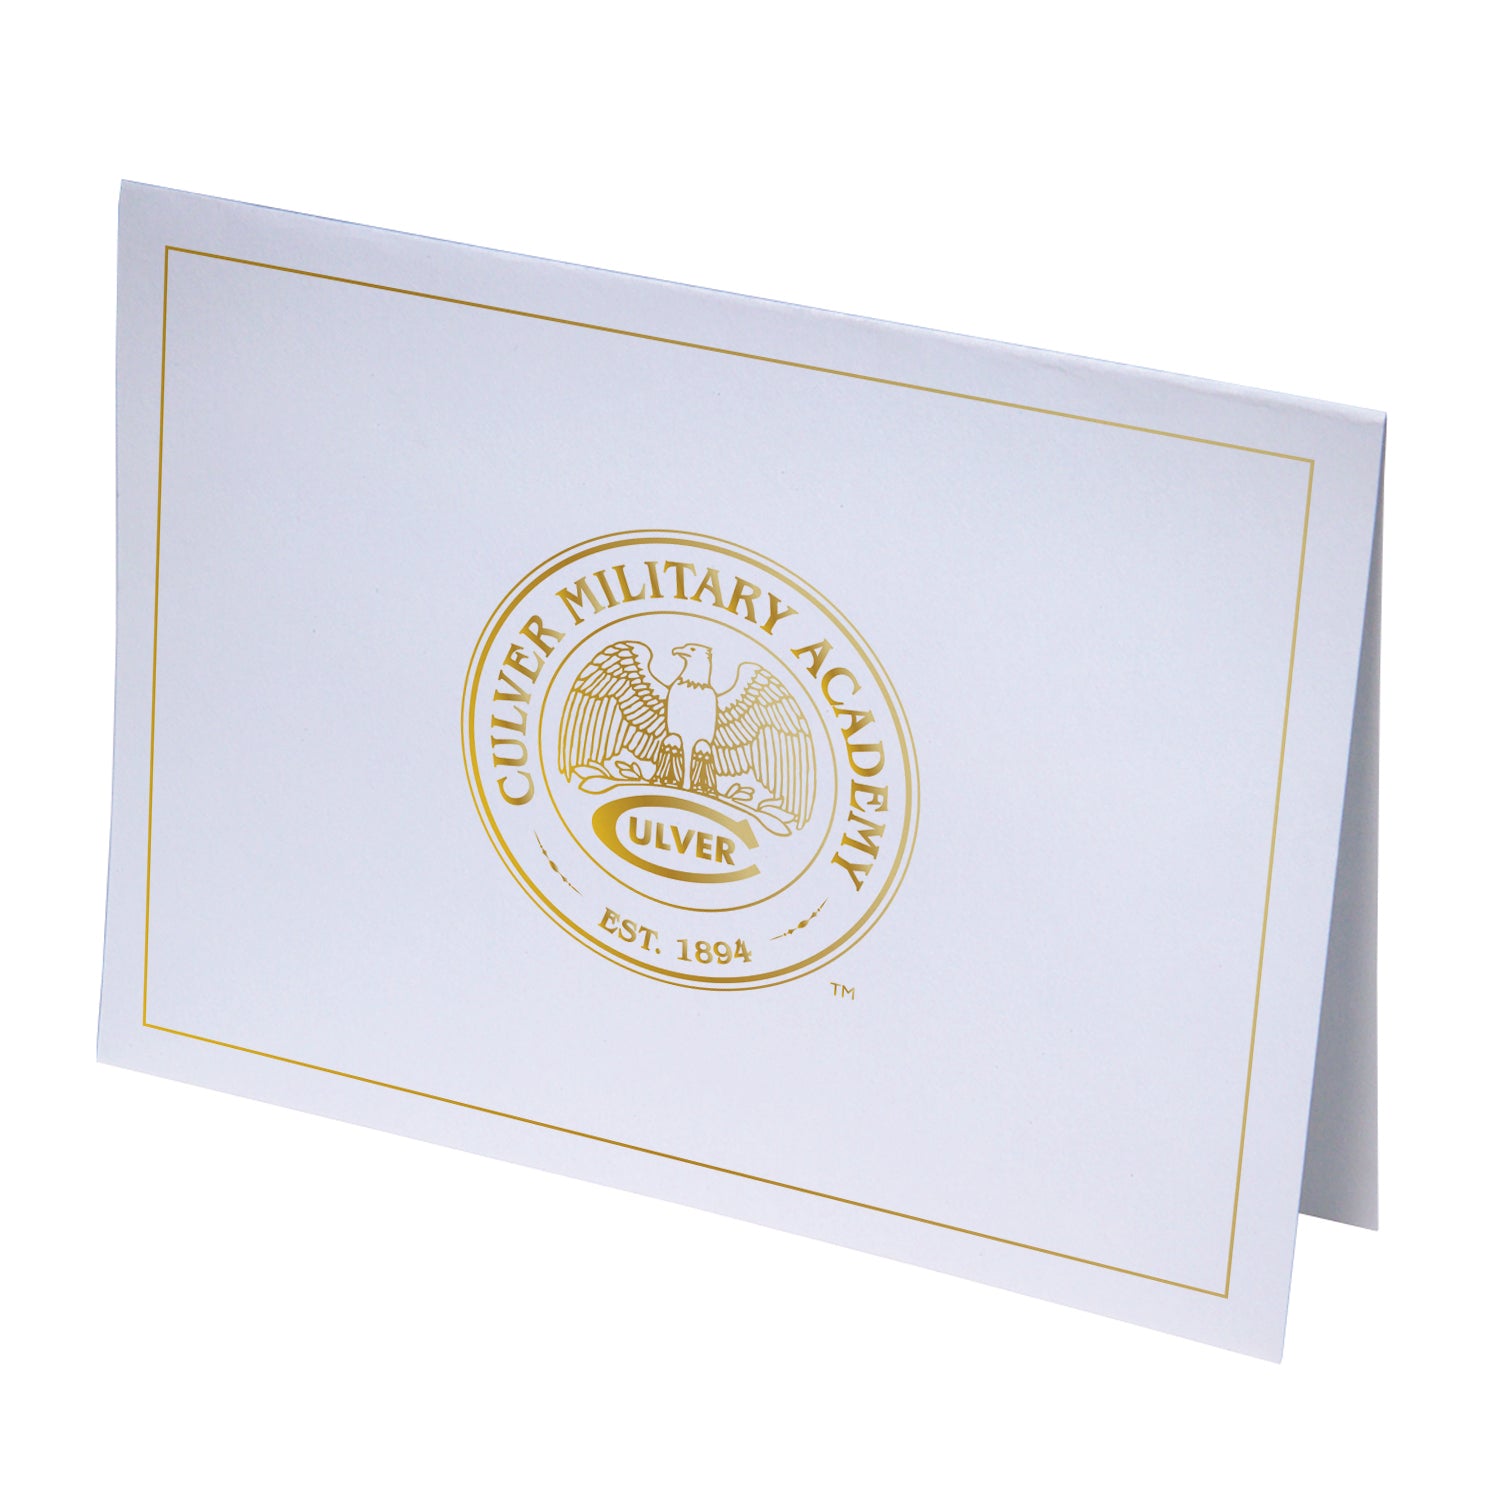 Culver Military Academy Blank Note Cards - 10 pack